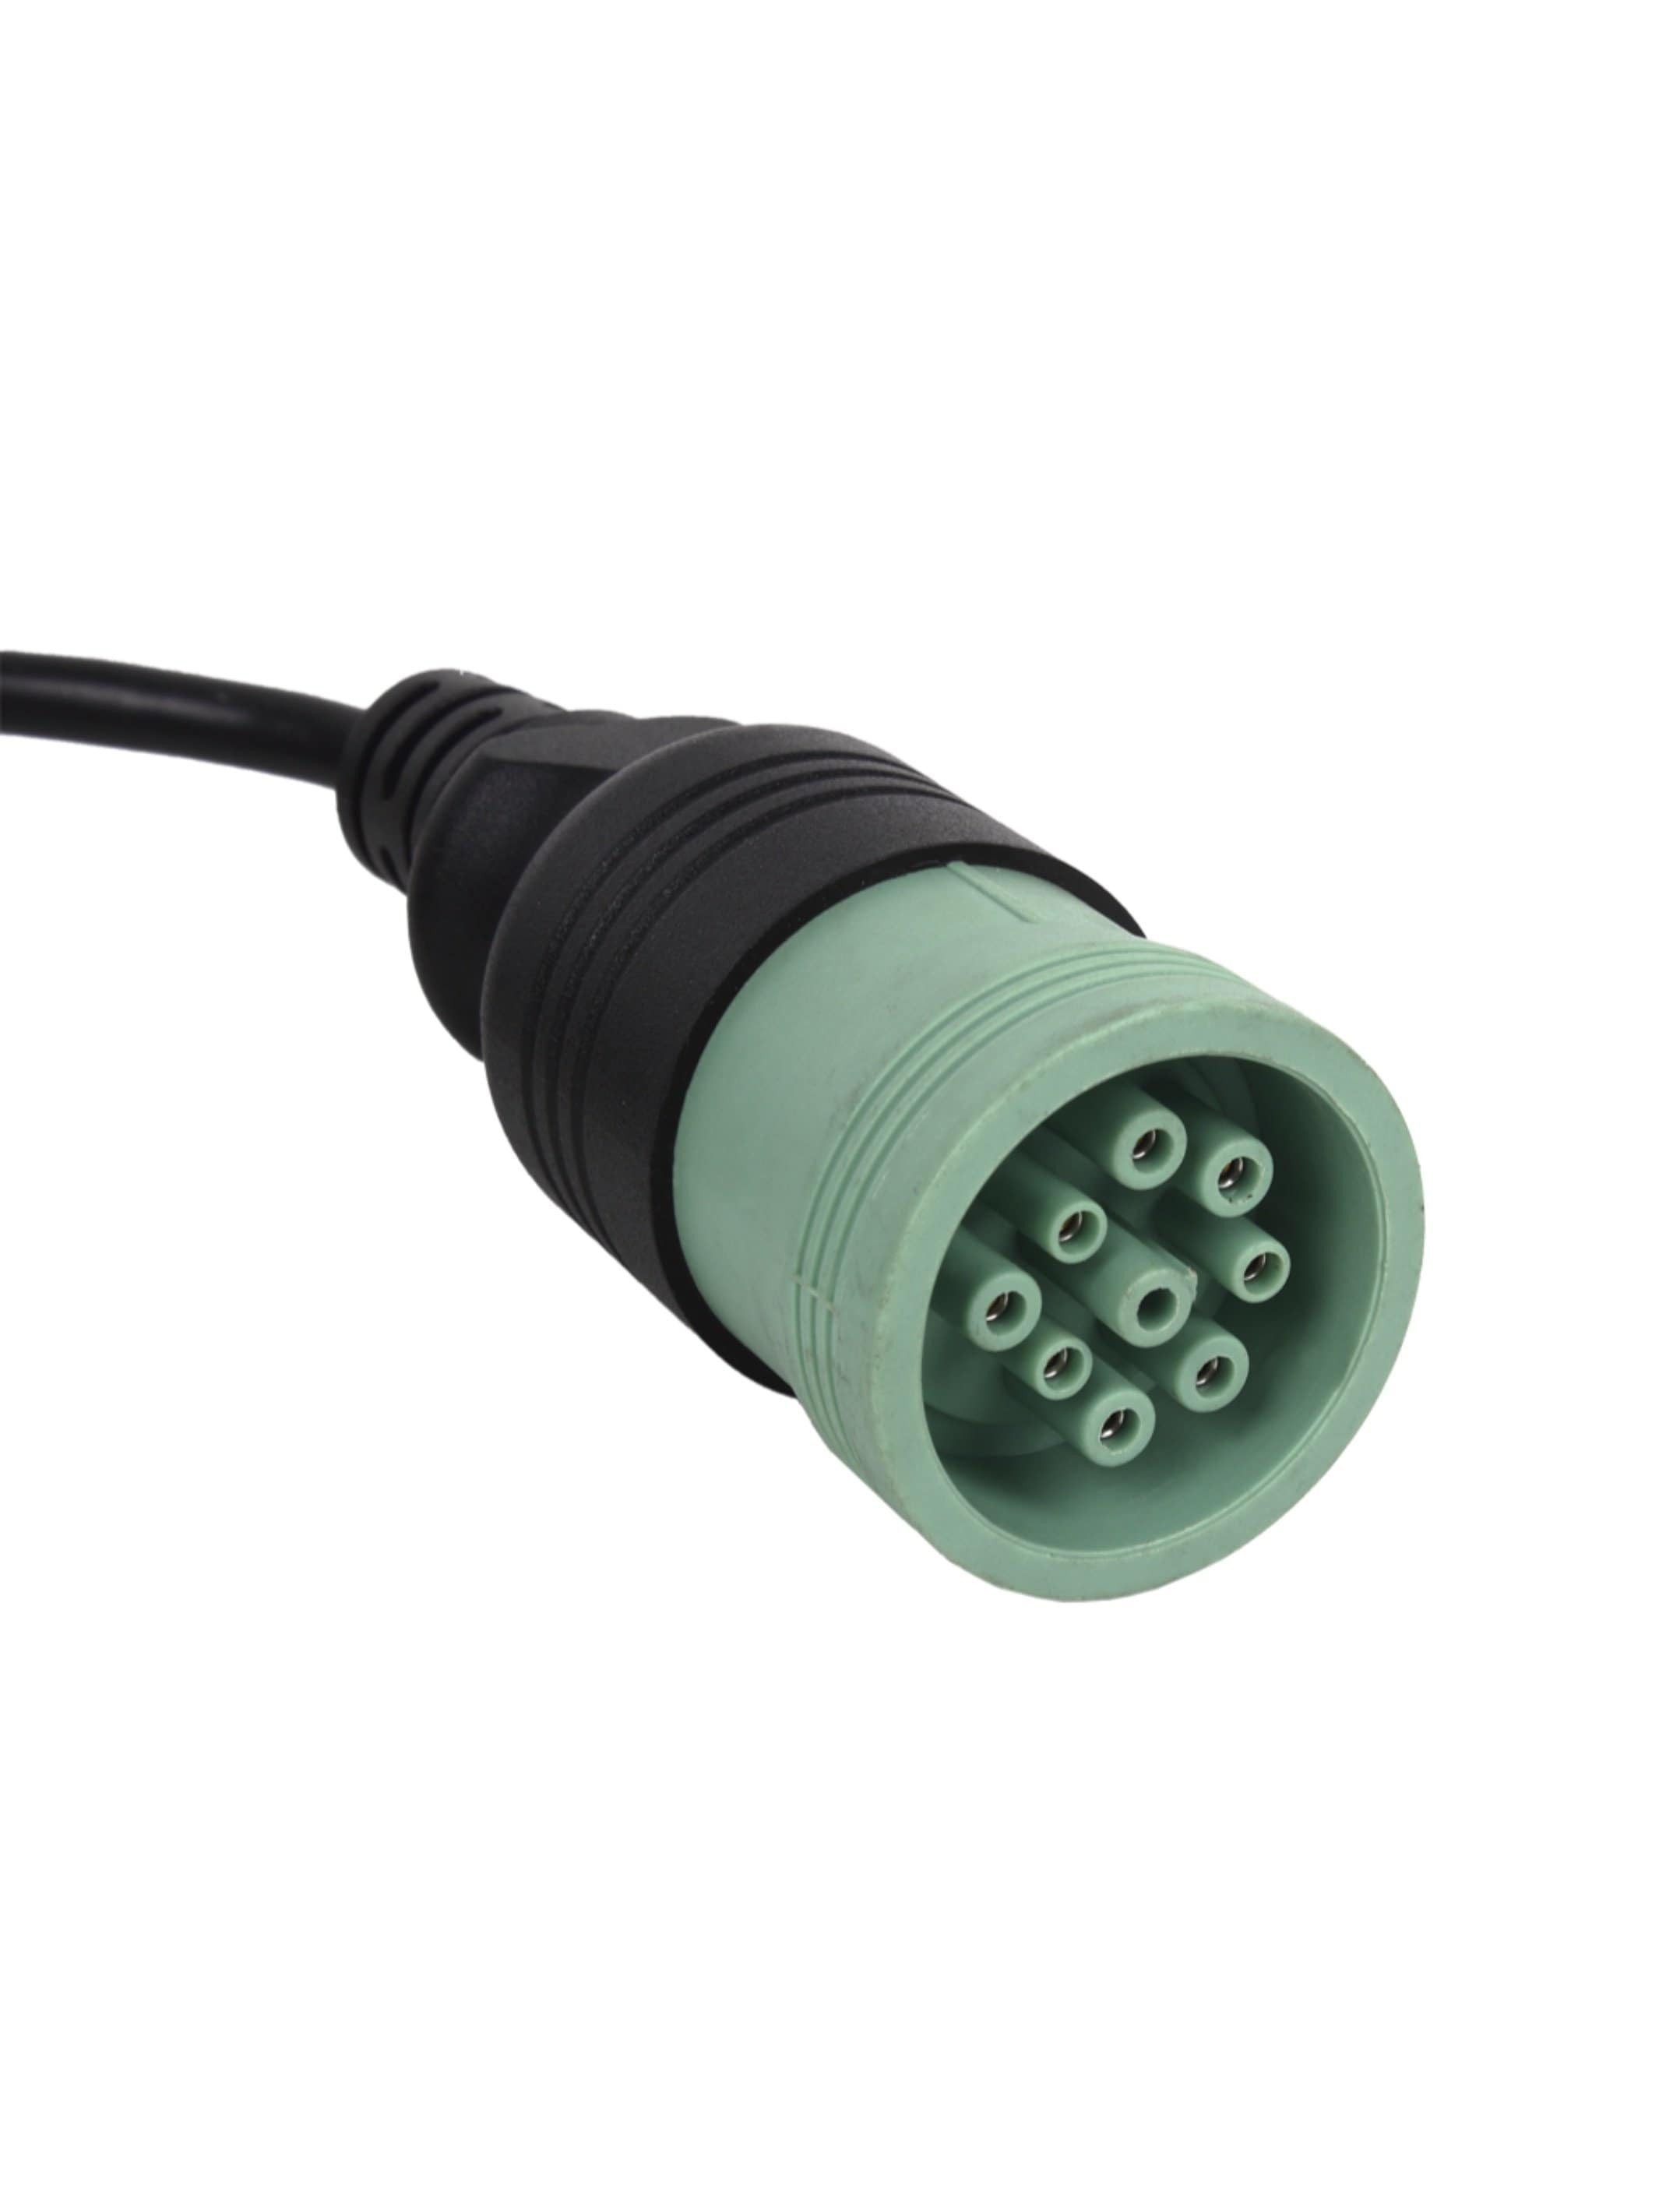 JDC217.9 Deutsch 9 Pin Type 2 Green Diagnostics Cable - Jaltest Agricultural & Construction, Heavy Equipment MH, Power Systems Deluxe Diagnostic Tool Kit